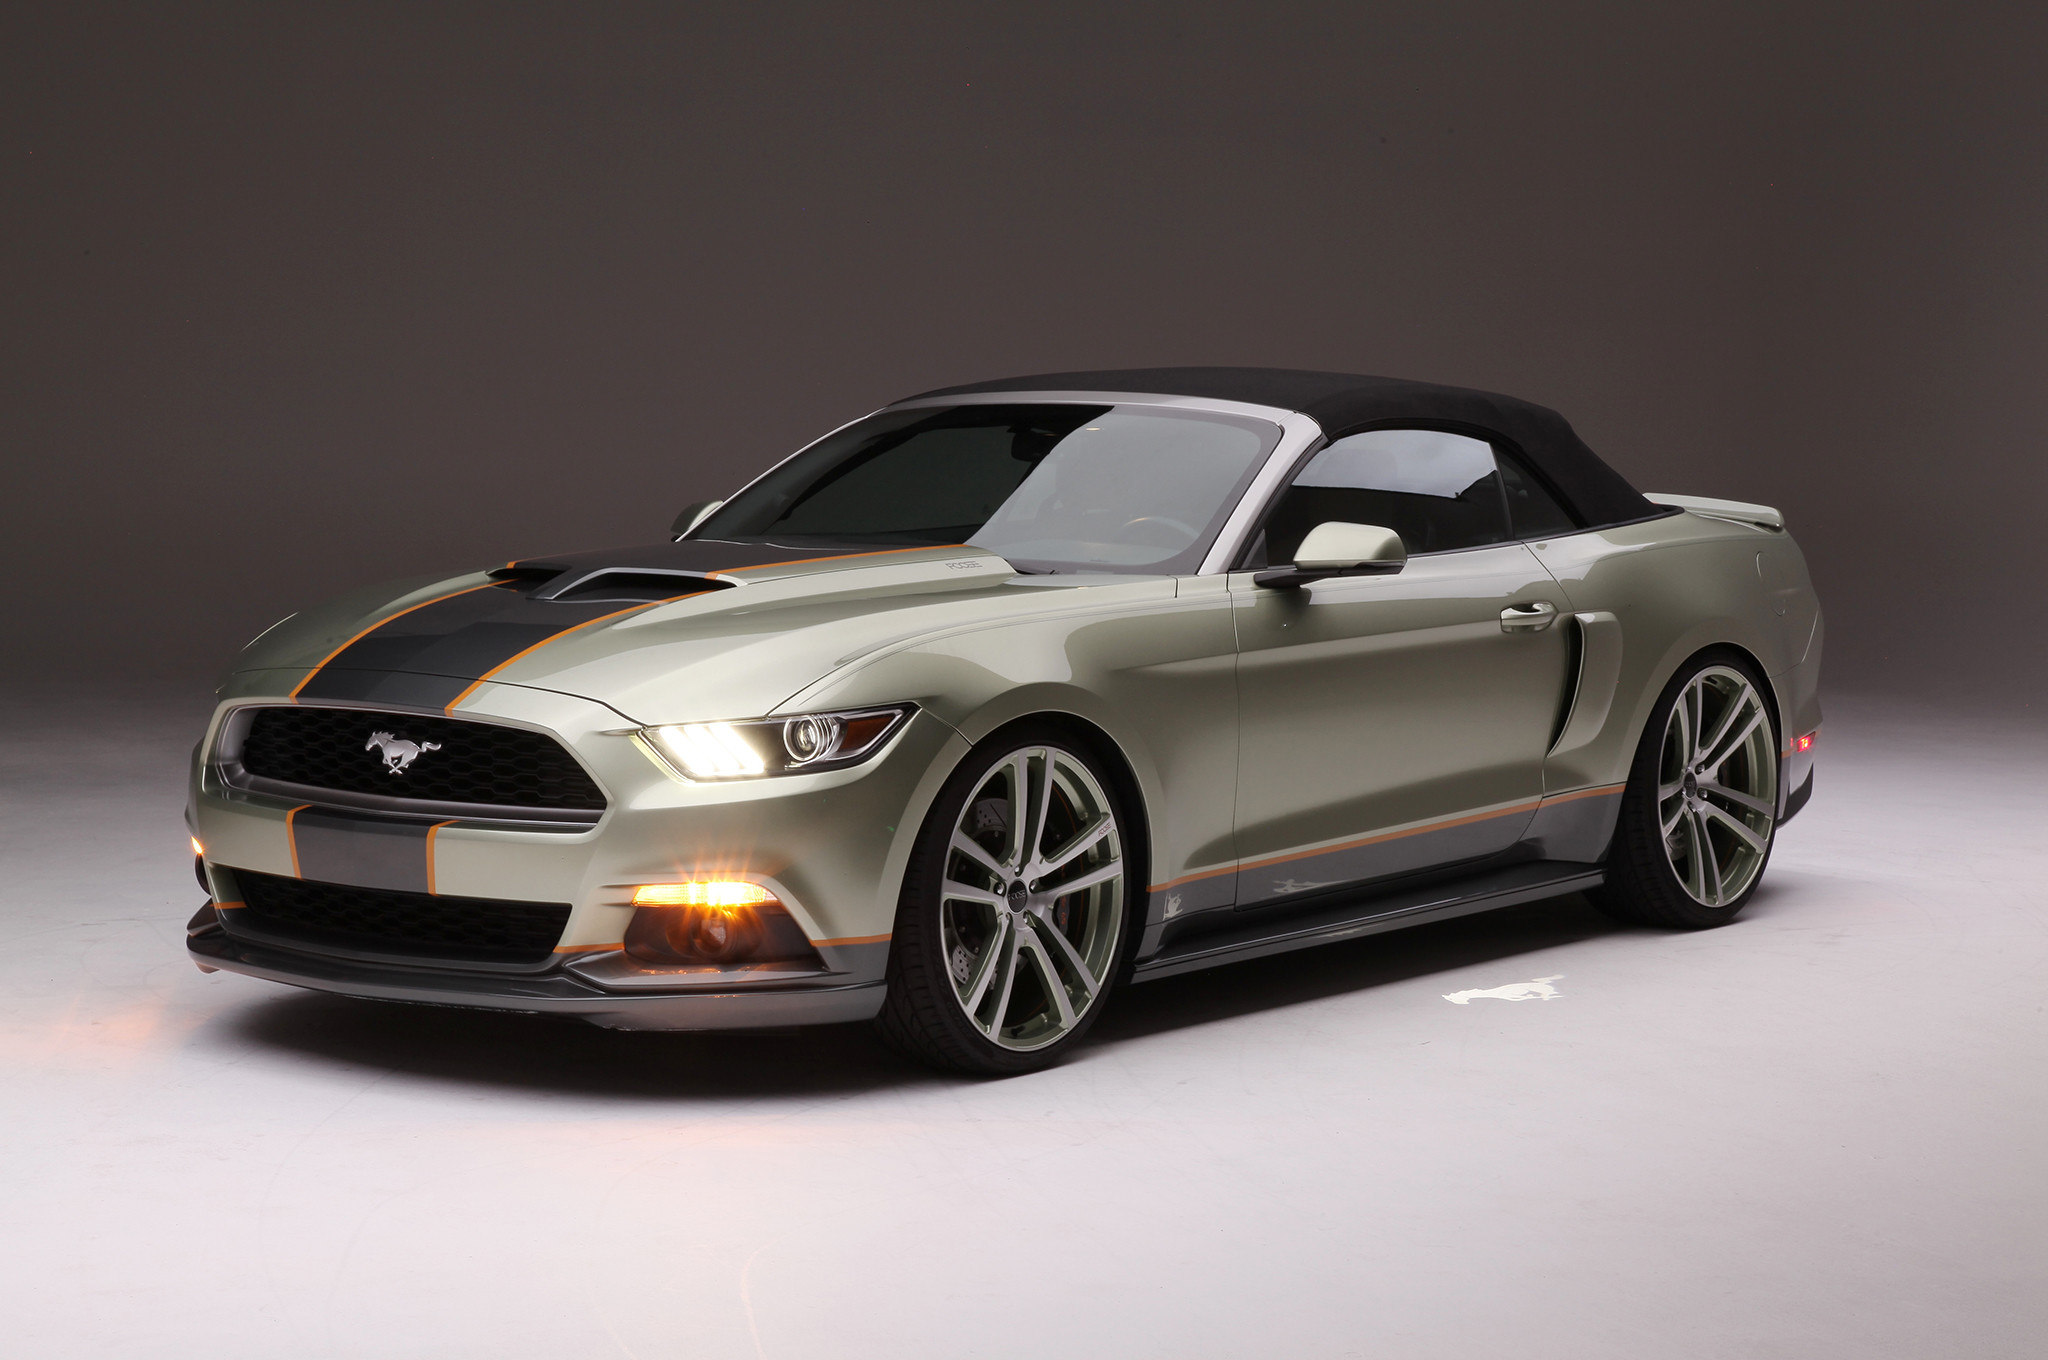 2048x1360 Chip Foose's Personal Ride Is the Very First Production 2015 Mustang S550  Convertible & It Doesn't Disappoint Photo Gallery